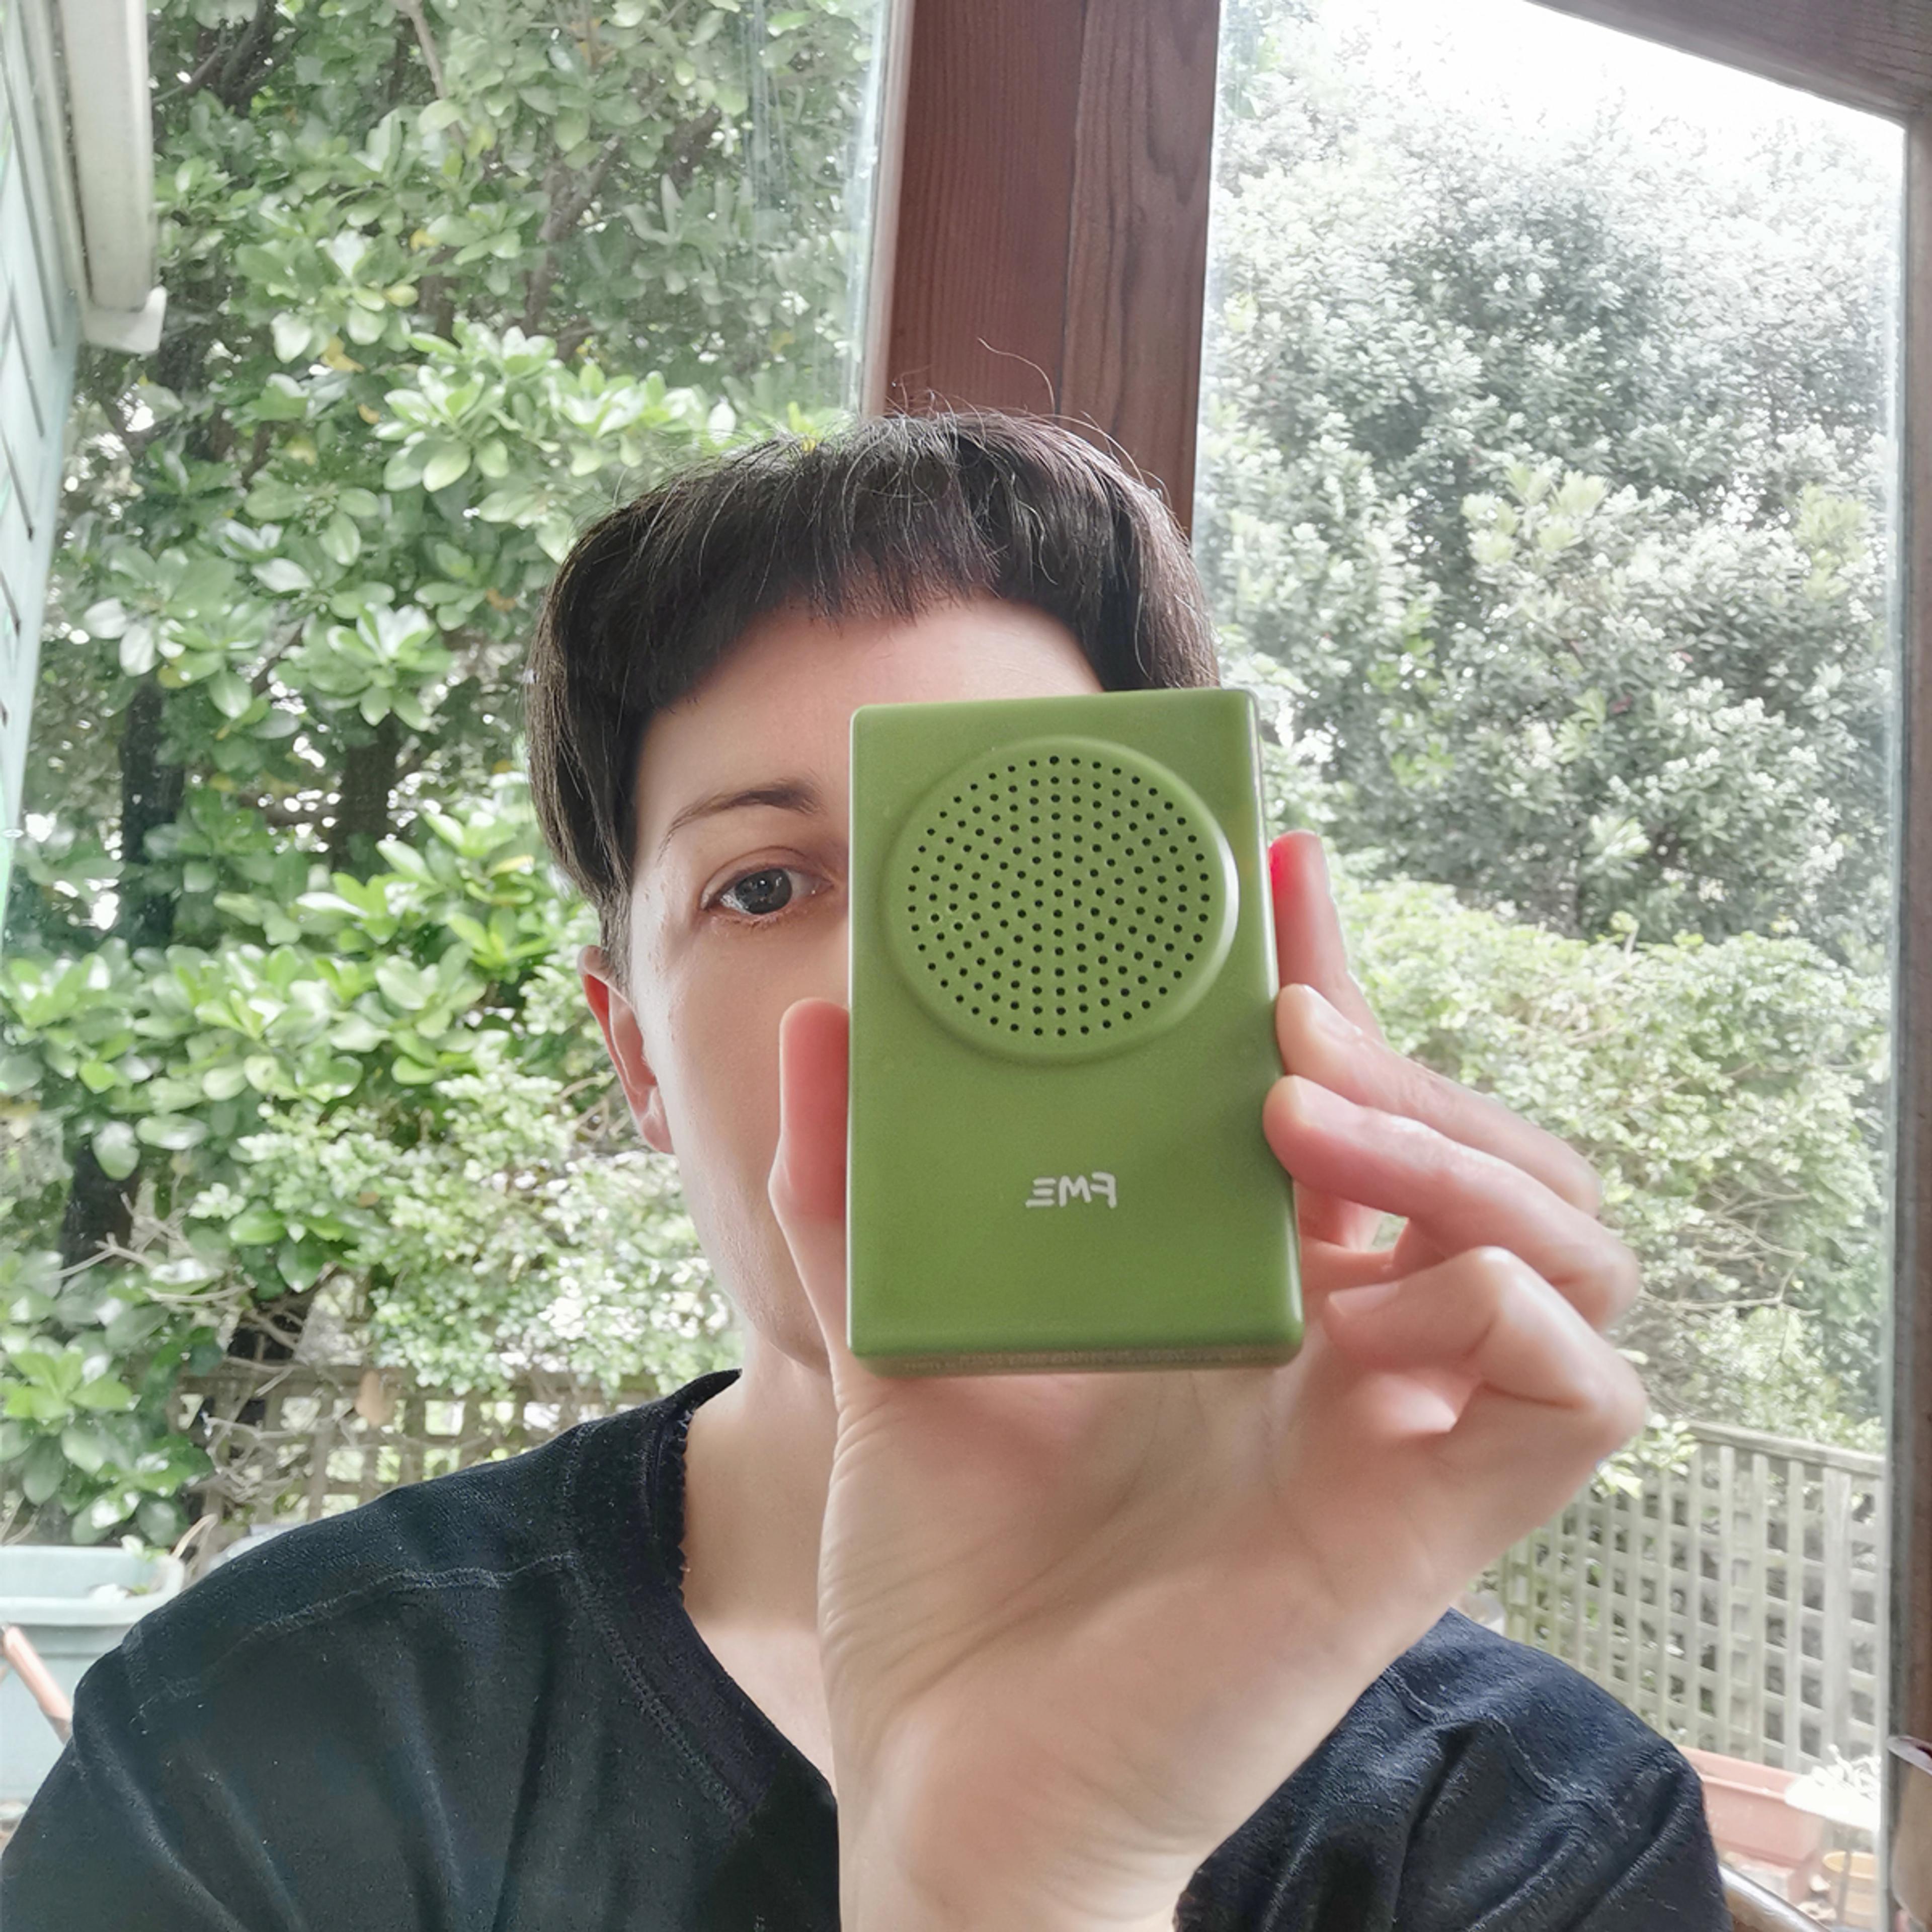 Rachel O'Neill holds a small green amp in front of her face